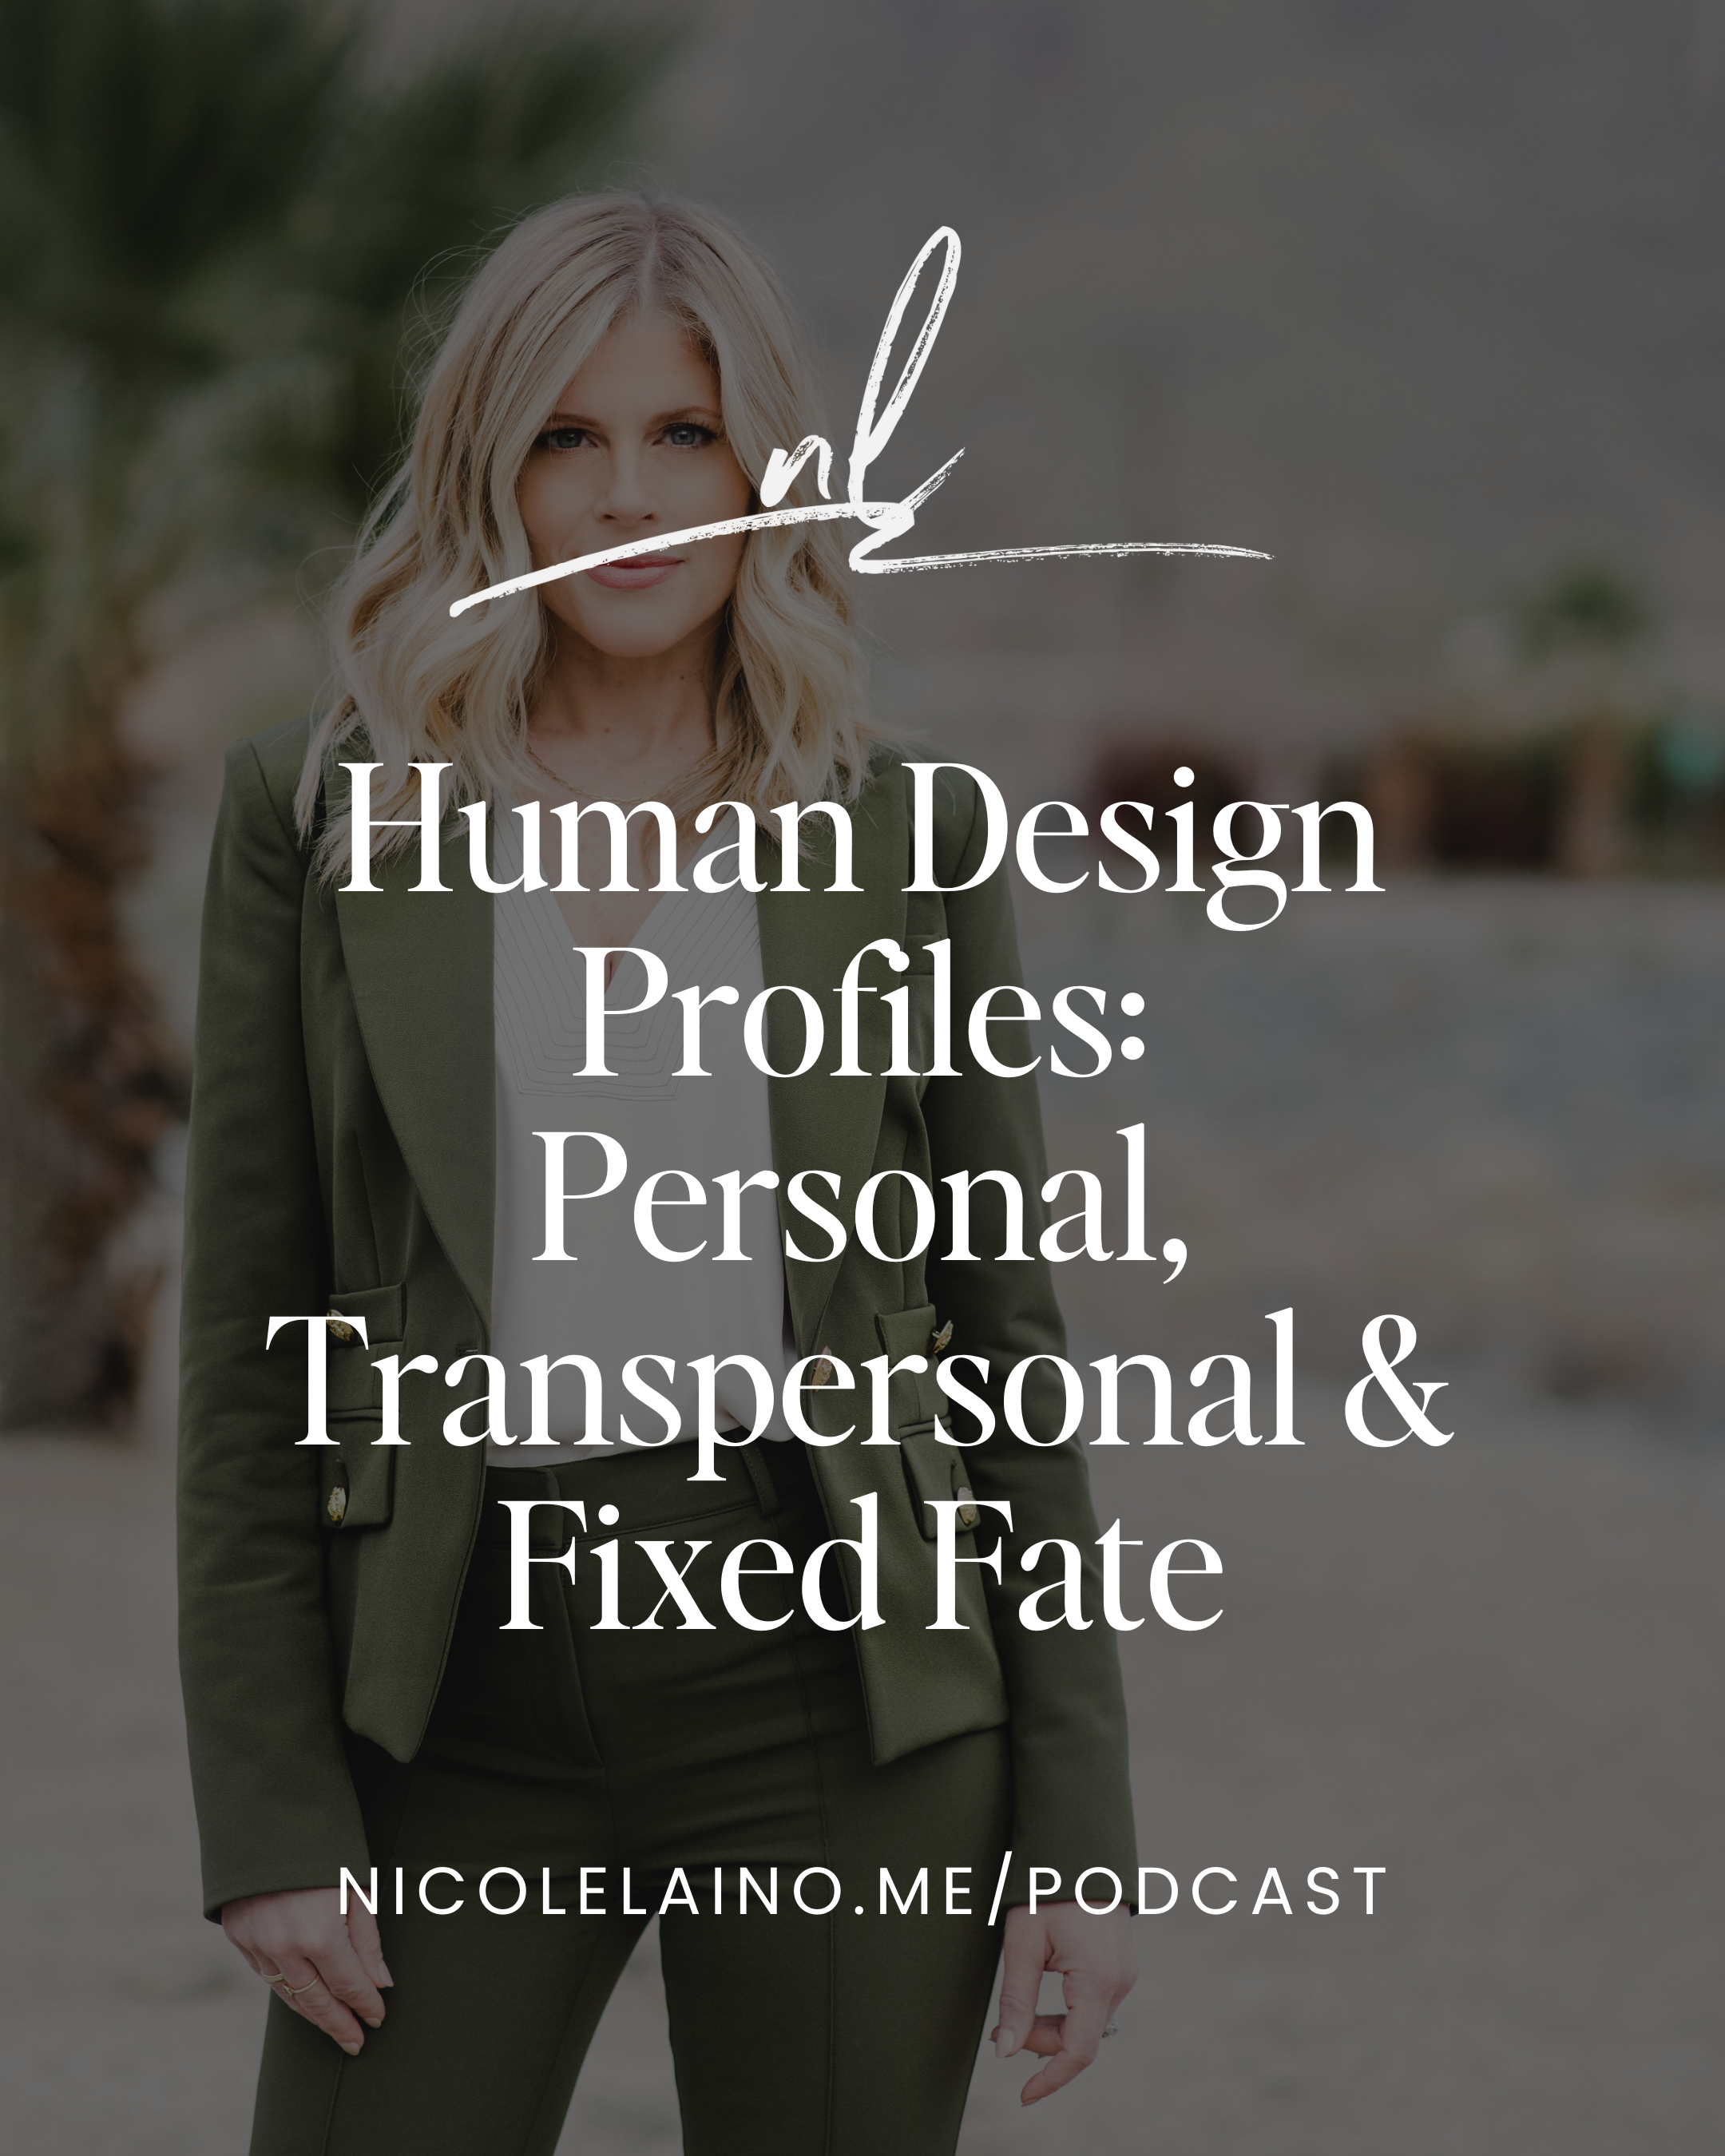 Human Design Profiles: Personal, Transpersonal & Fixed Fate